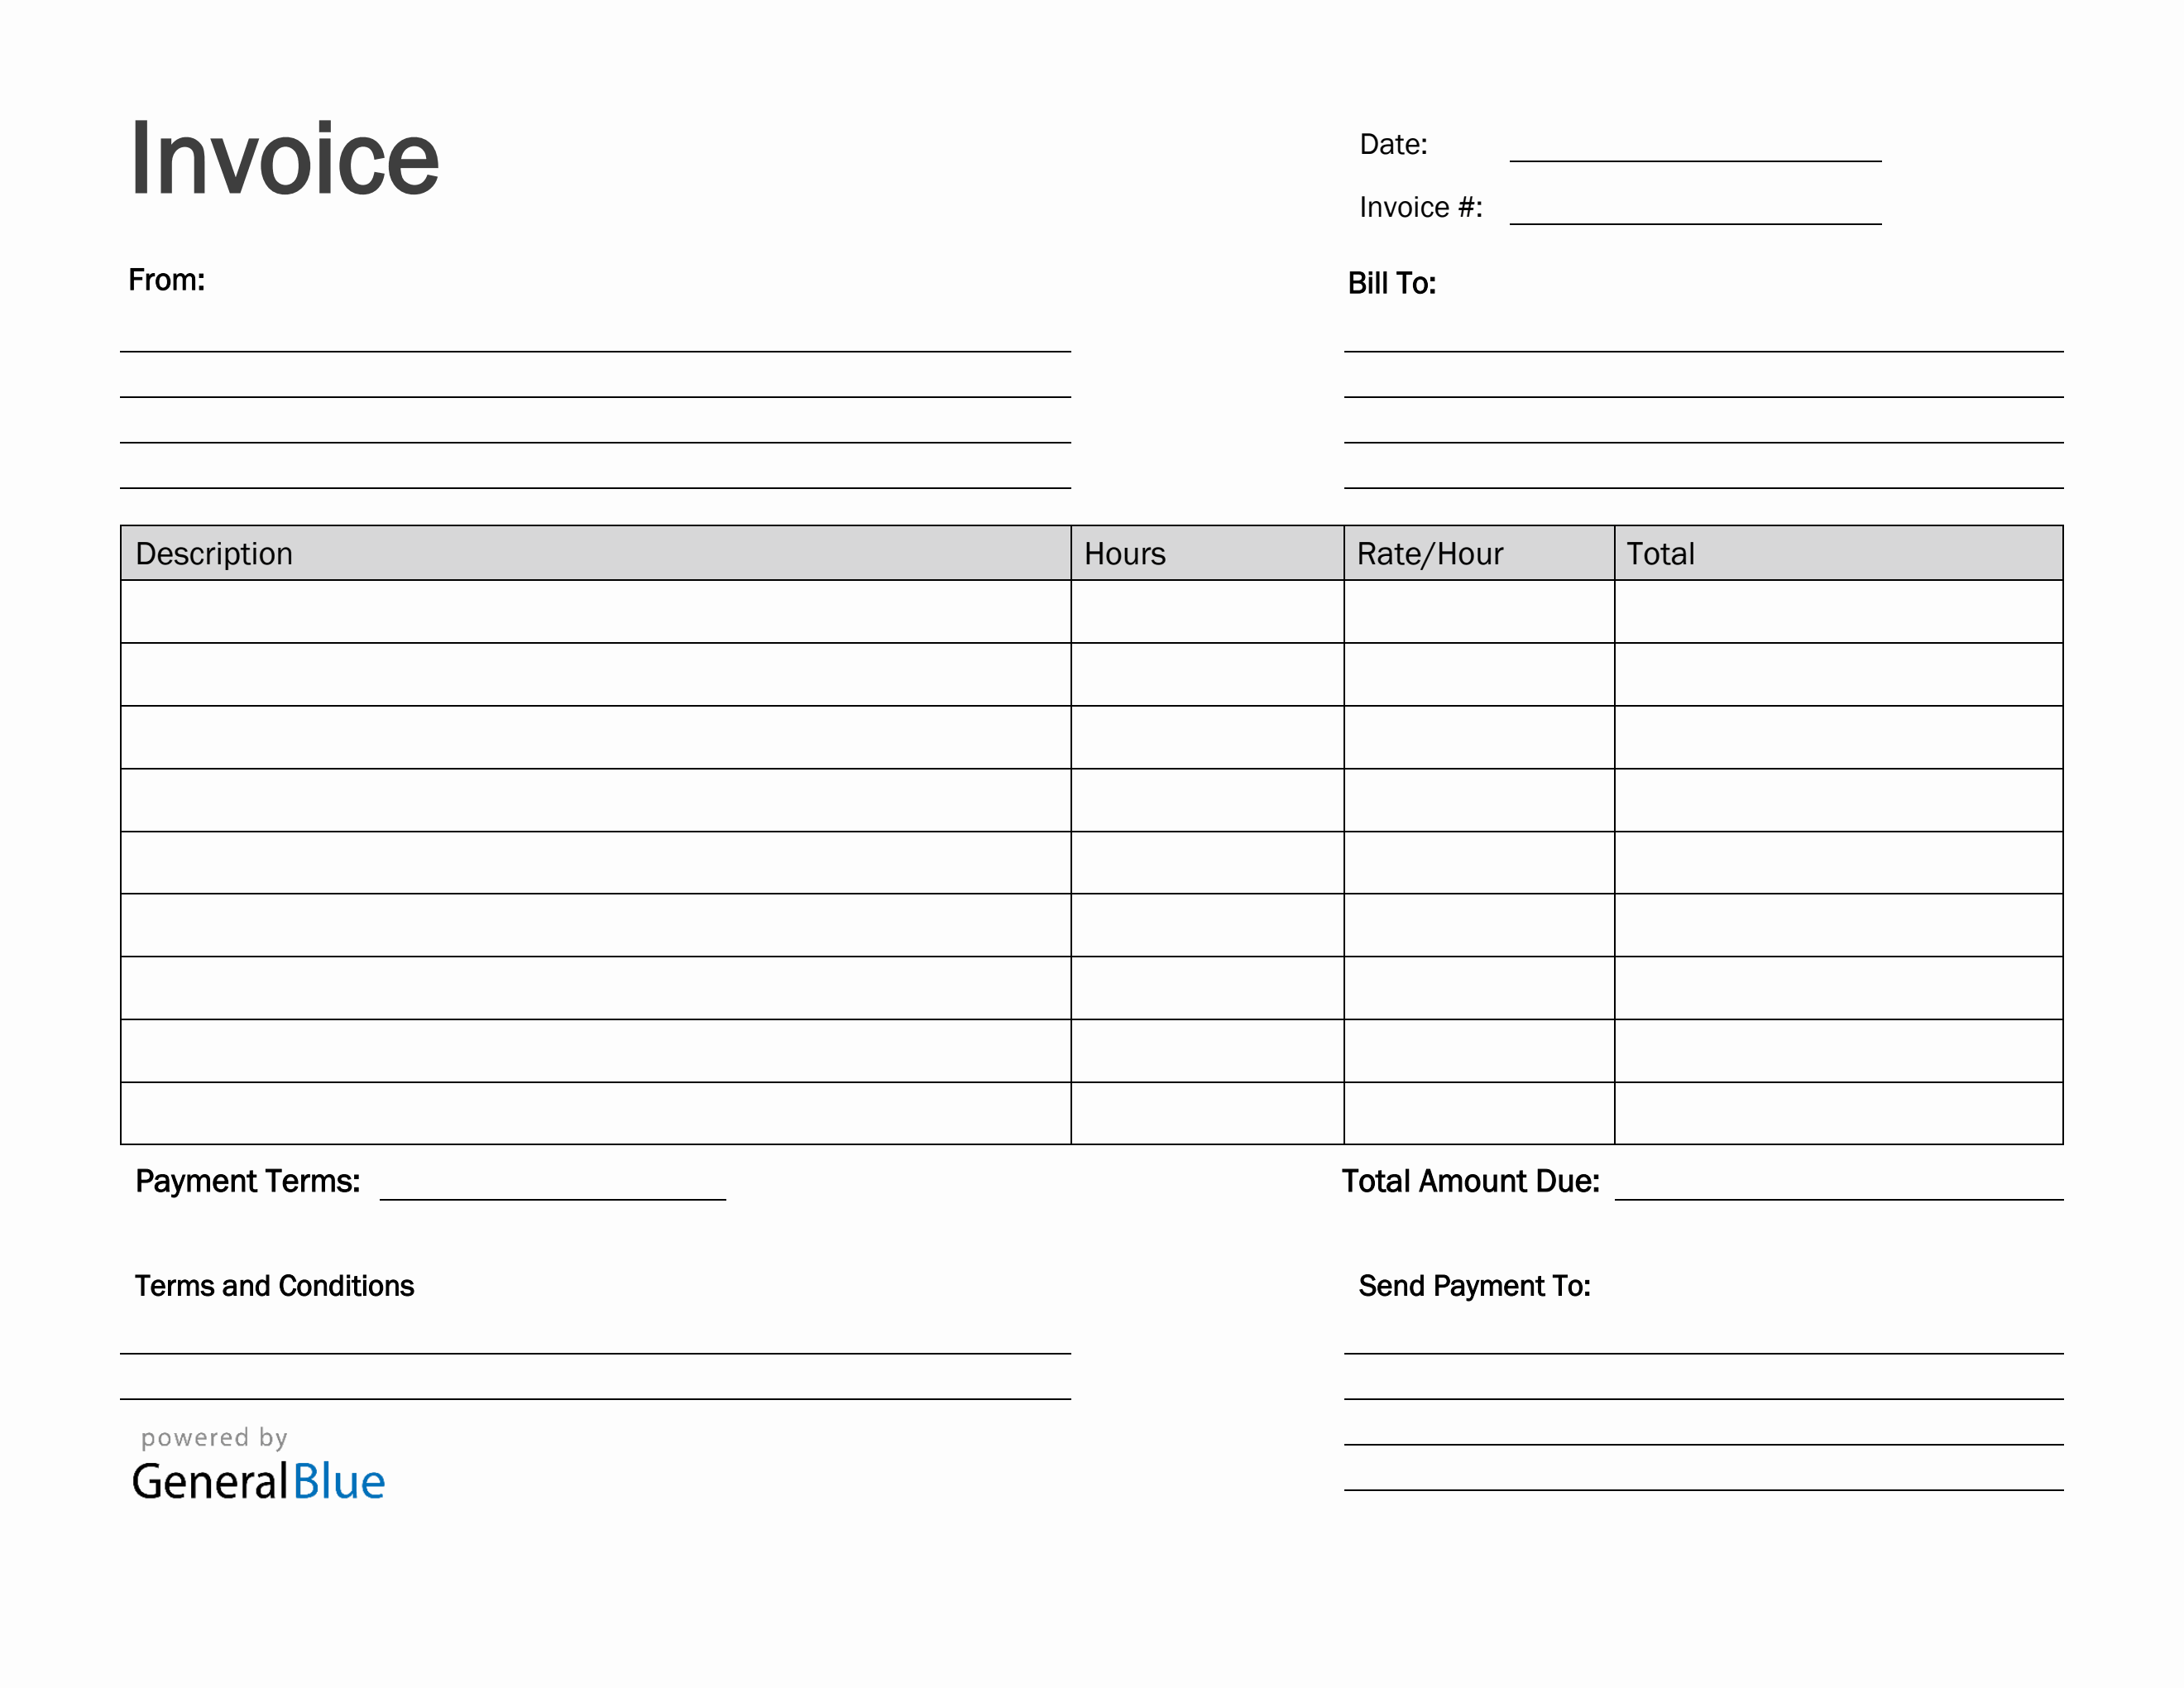 Freelance Hourly Invoice Template in PDF (Simple)